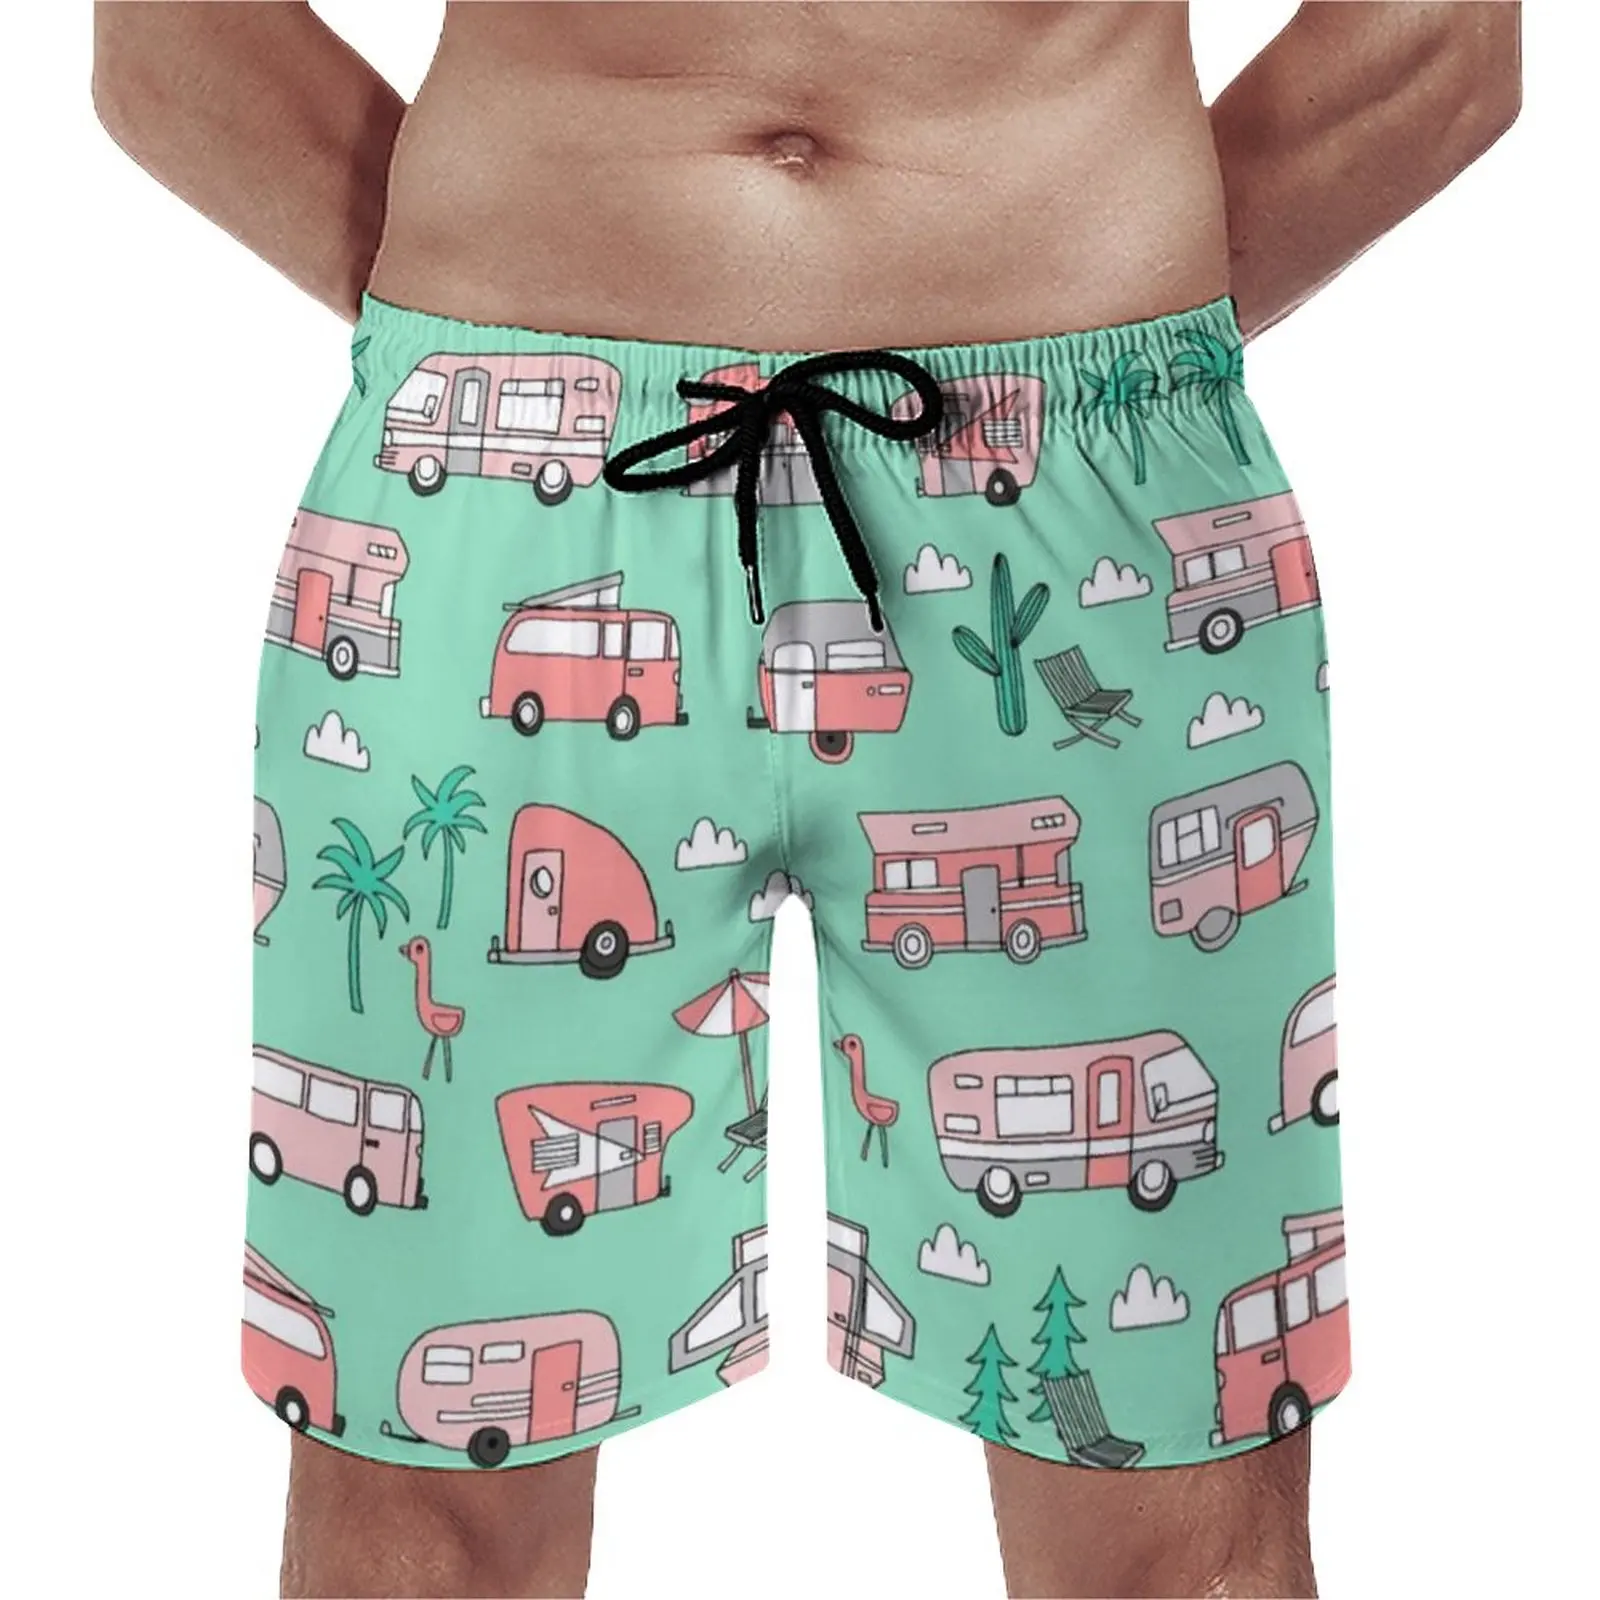 

Camper Vacation Board Shorts RV Hipster Road Trip Beach Shorts Hot Sale Men Cute Printed Swimming Trunks Plus Size 3XL